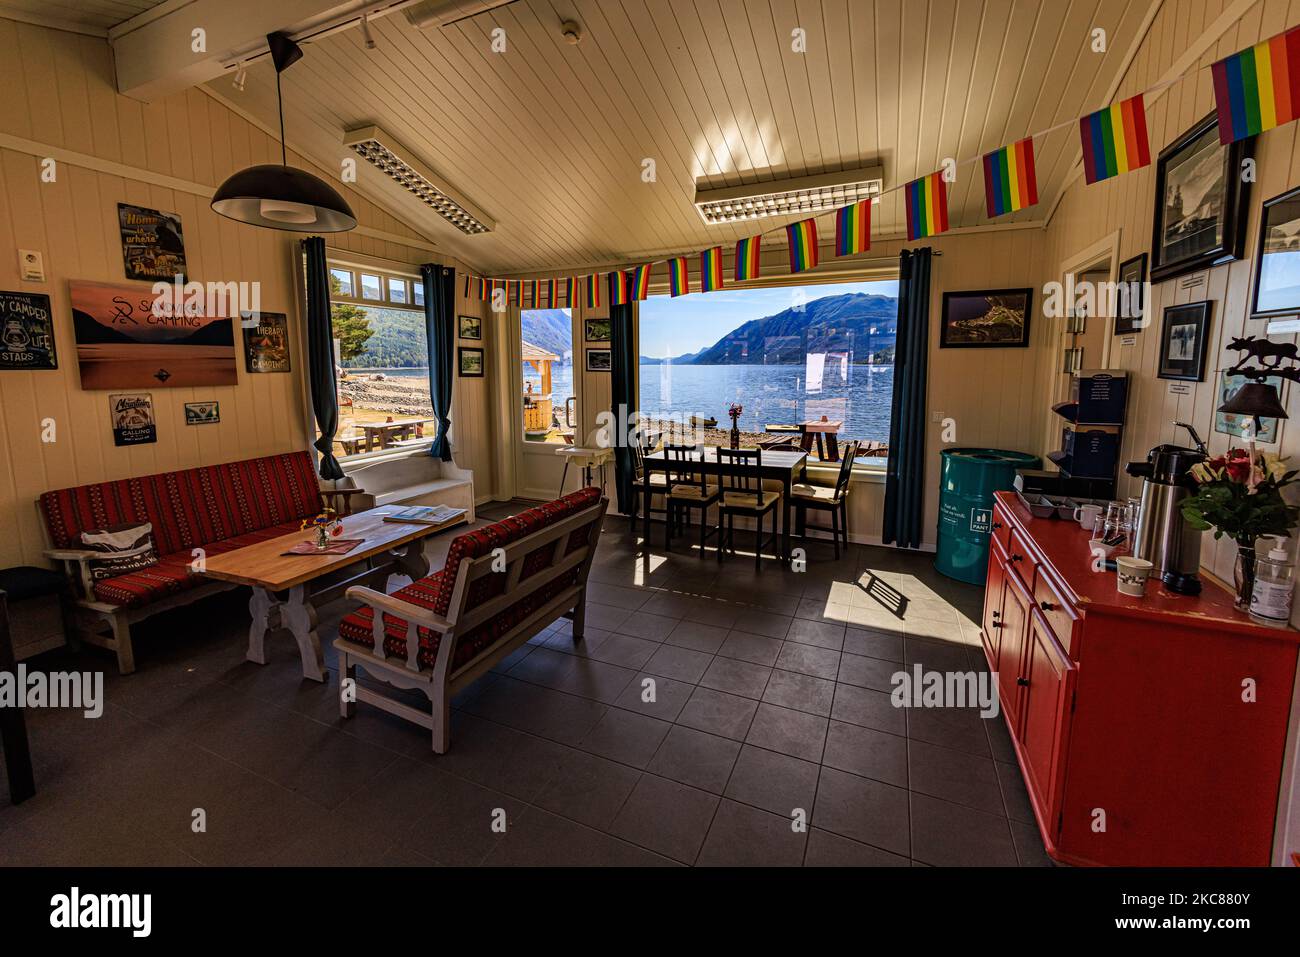 A beautiful small cafe in Sandviken Camping with a lake and mountains visible from the window Stock Photo